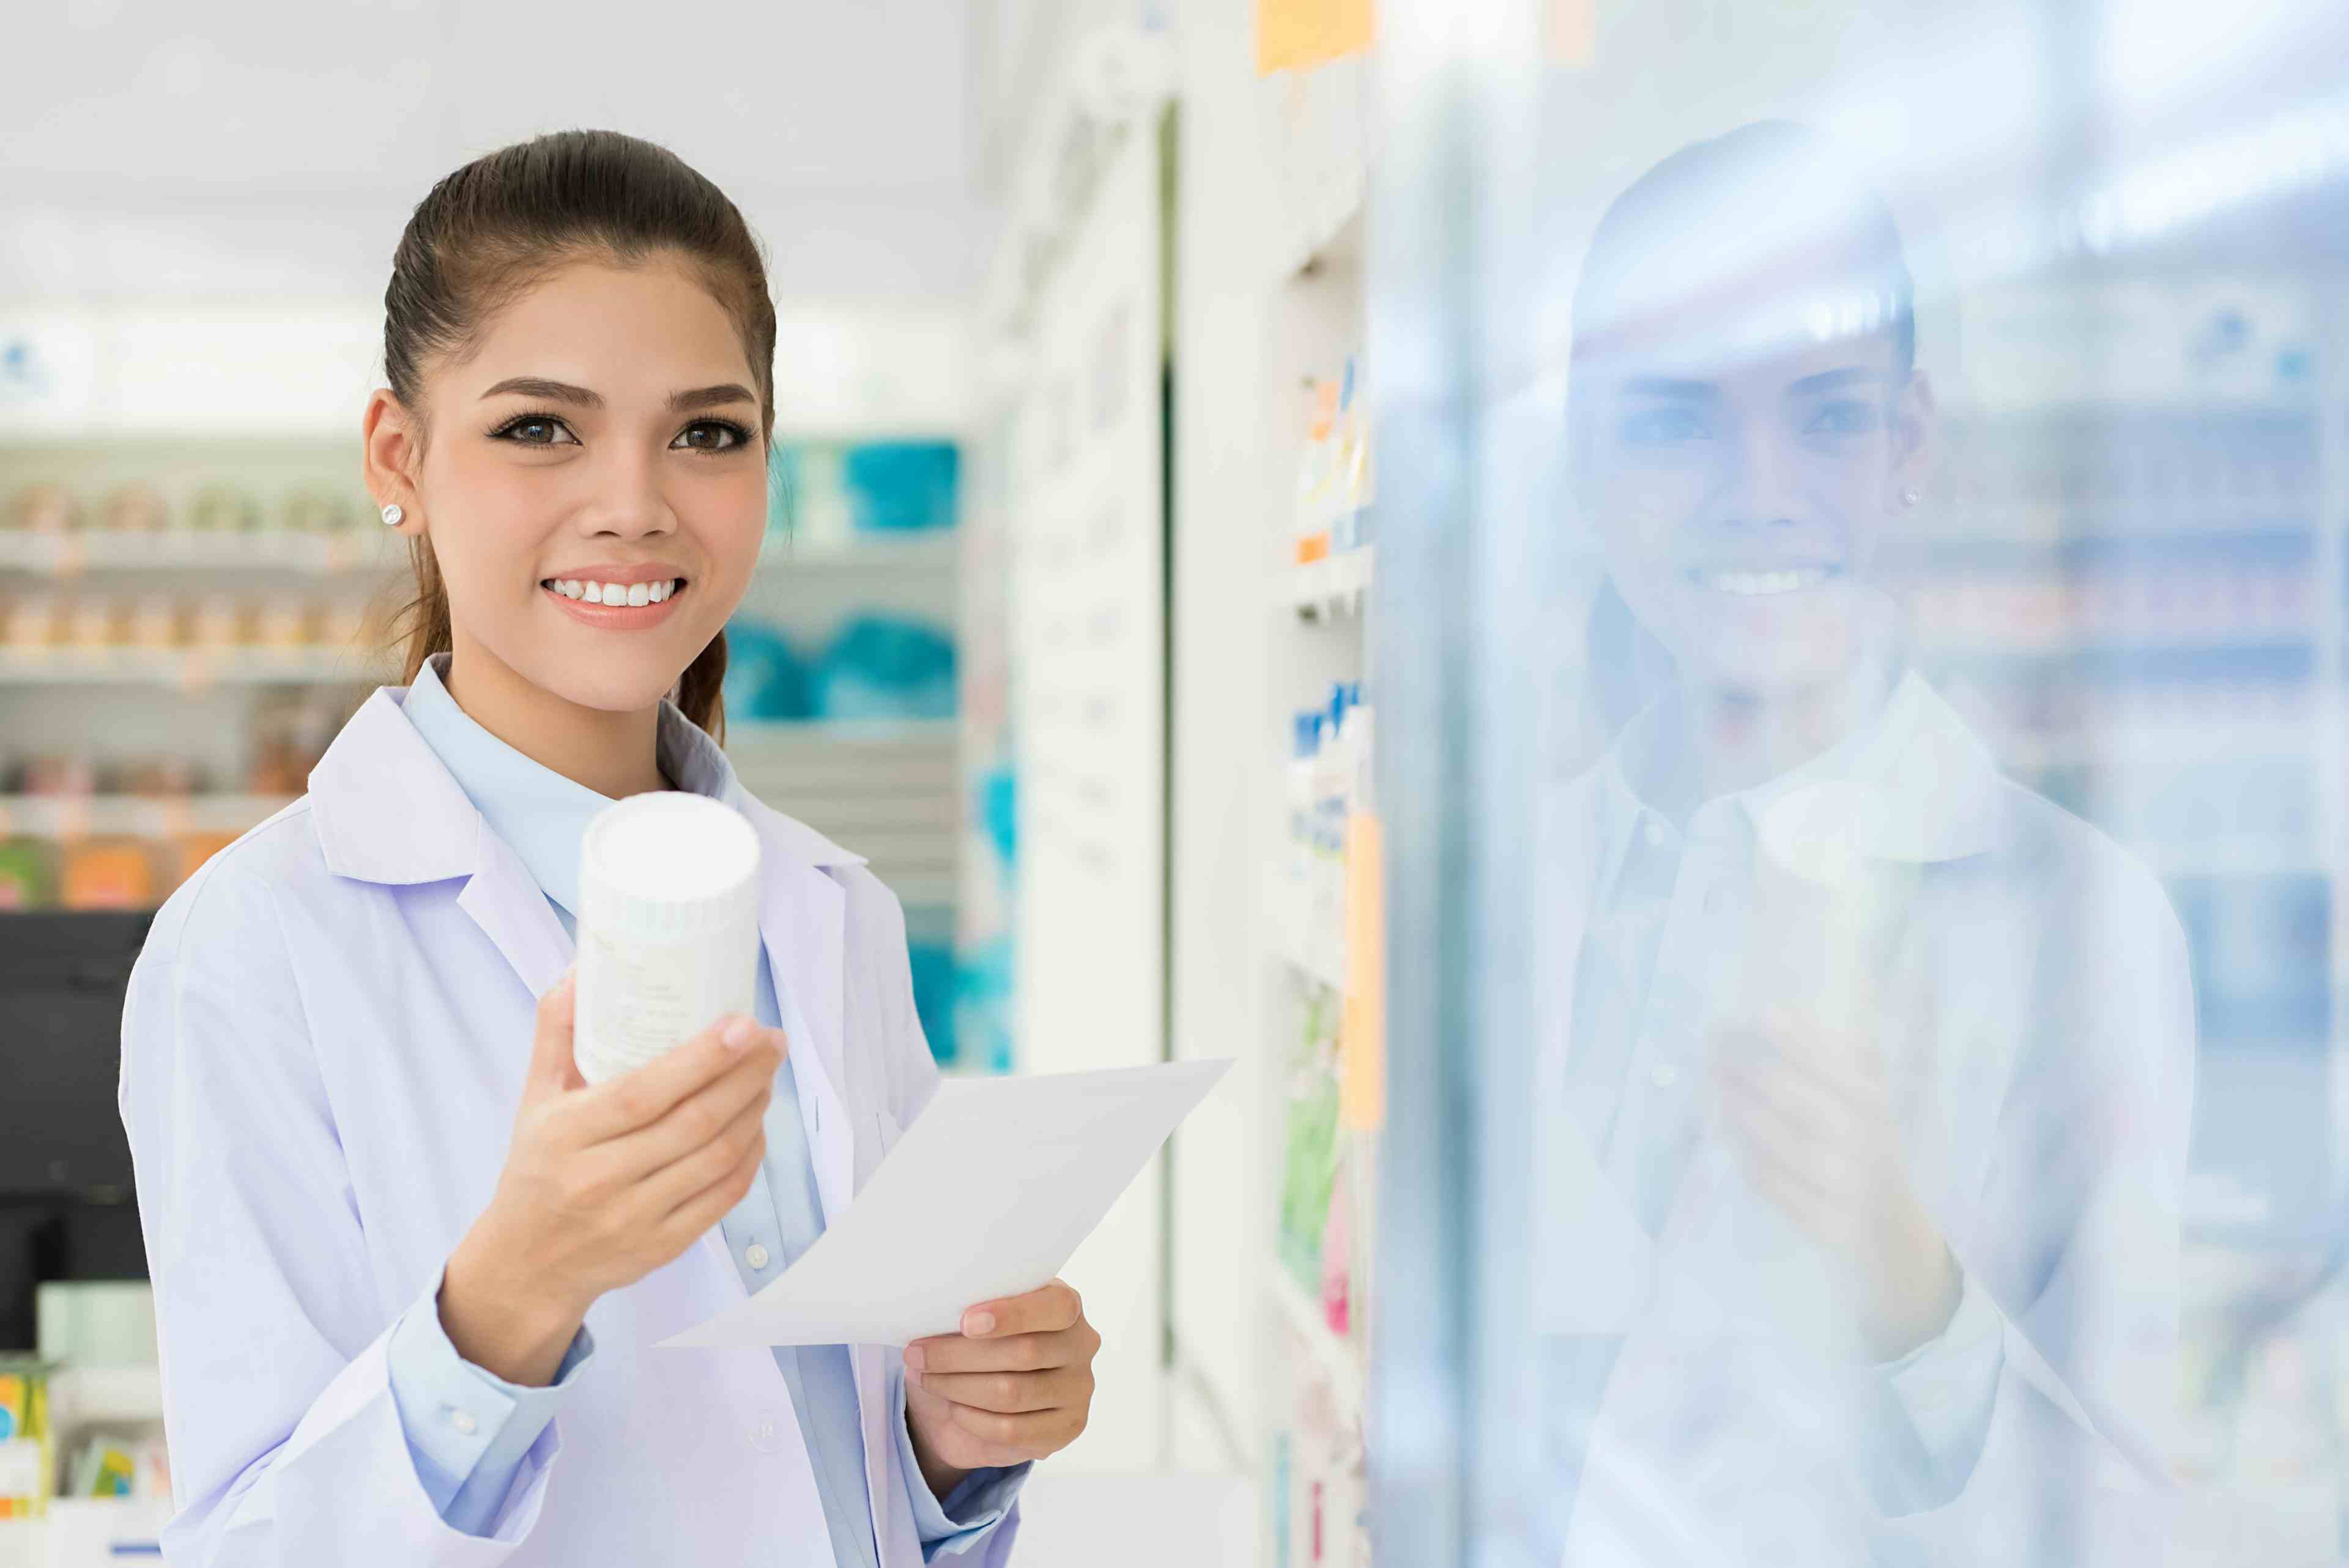 Smiling Asian female pharmacist working in chemist shop or pharmacy | Image Credit: Atstock Productions - stock.adobe.com